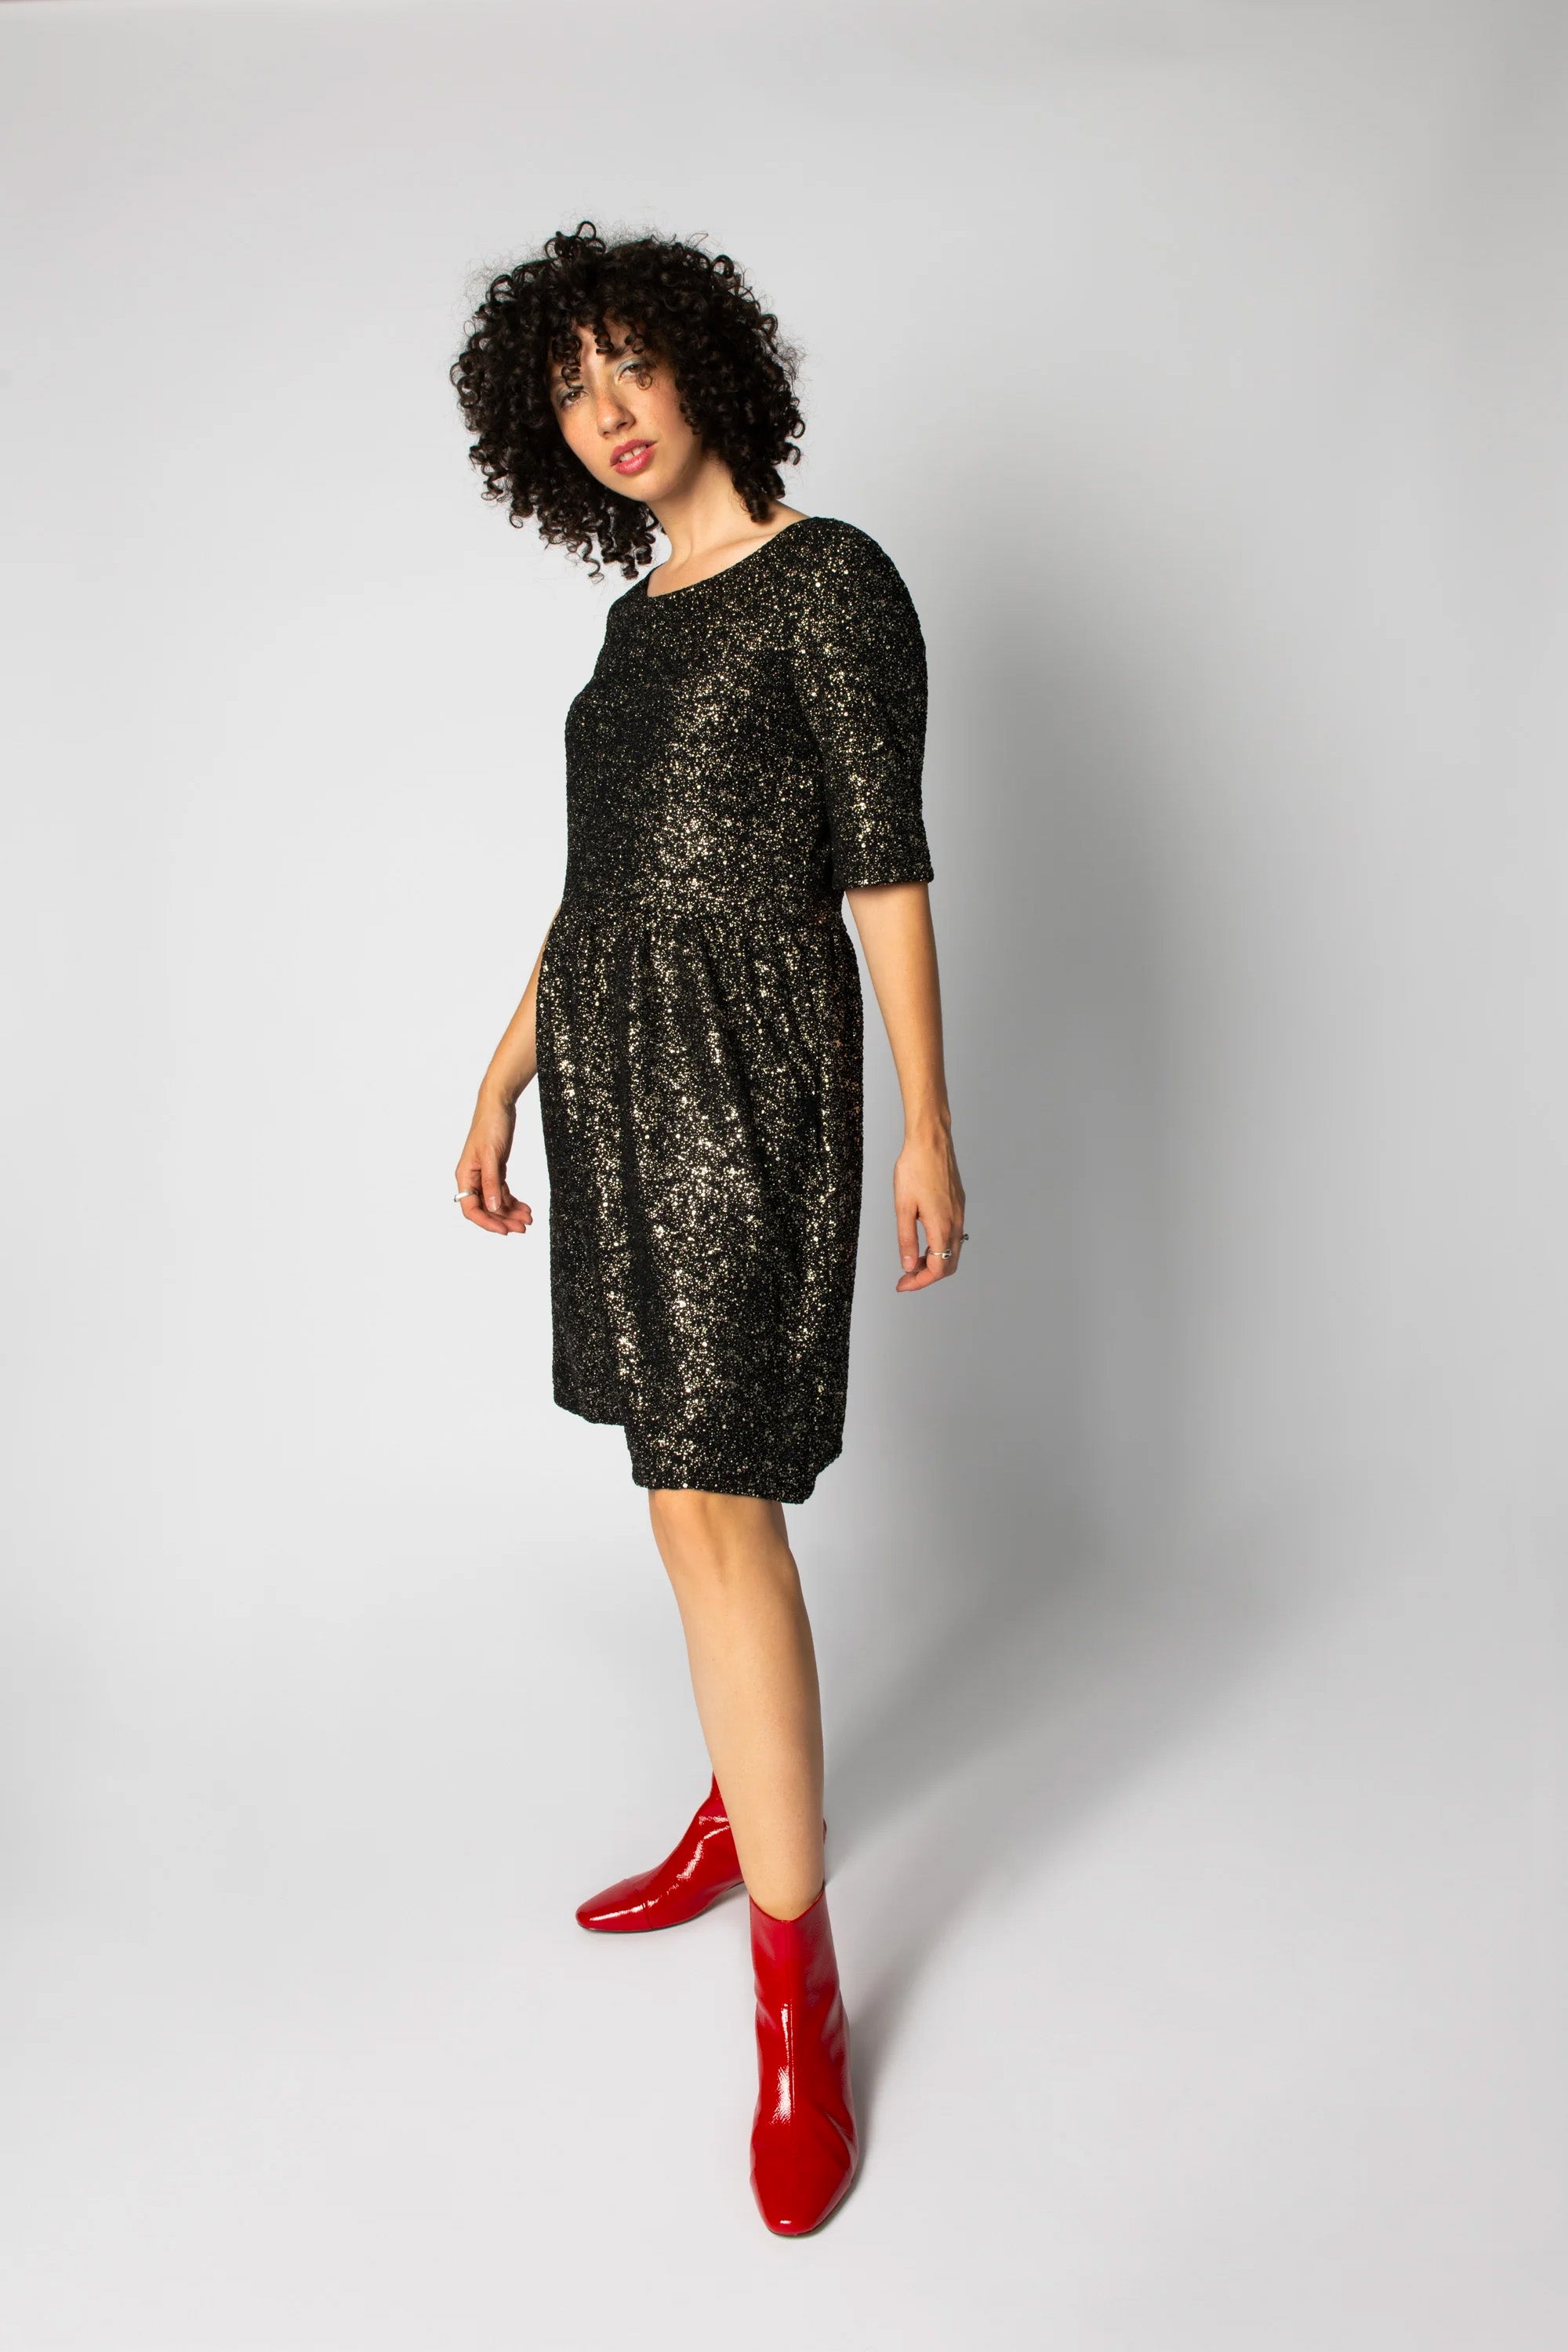 Lousse Dress by Eve Lavoie, Glitter Fabric, reversible, boat neck on one side, V-neck at the other, defined waist, full skirt, elbow-length sleeves, sizes XS to XL, made in Montreal 